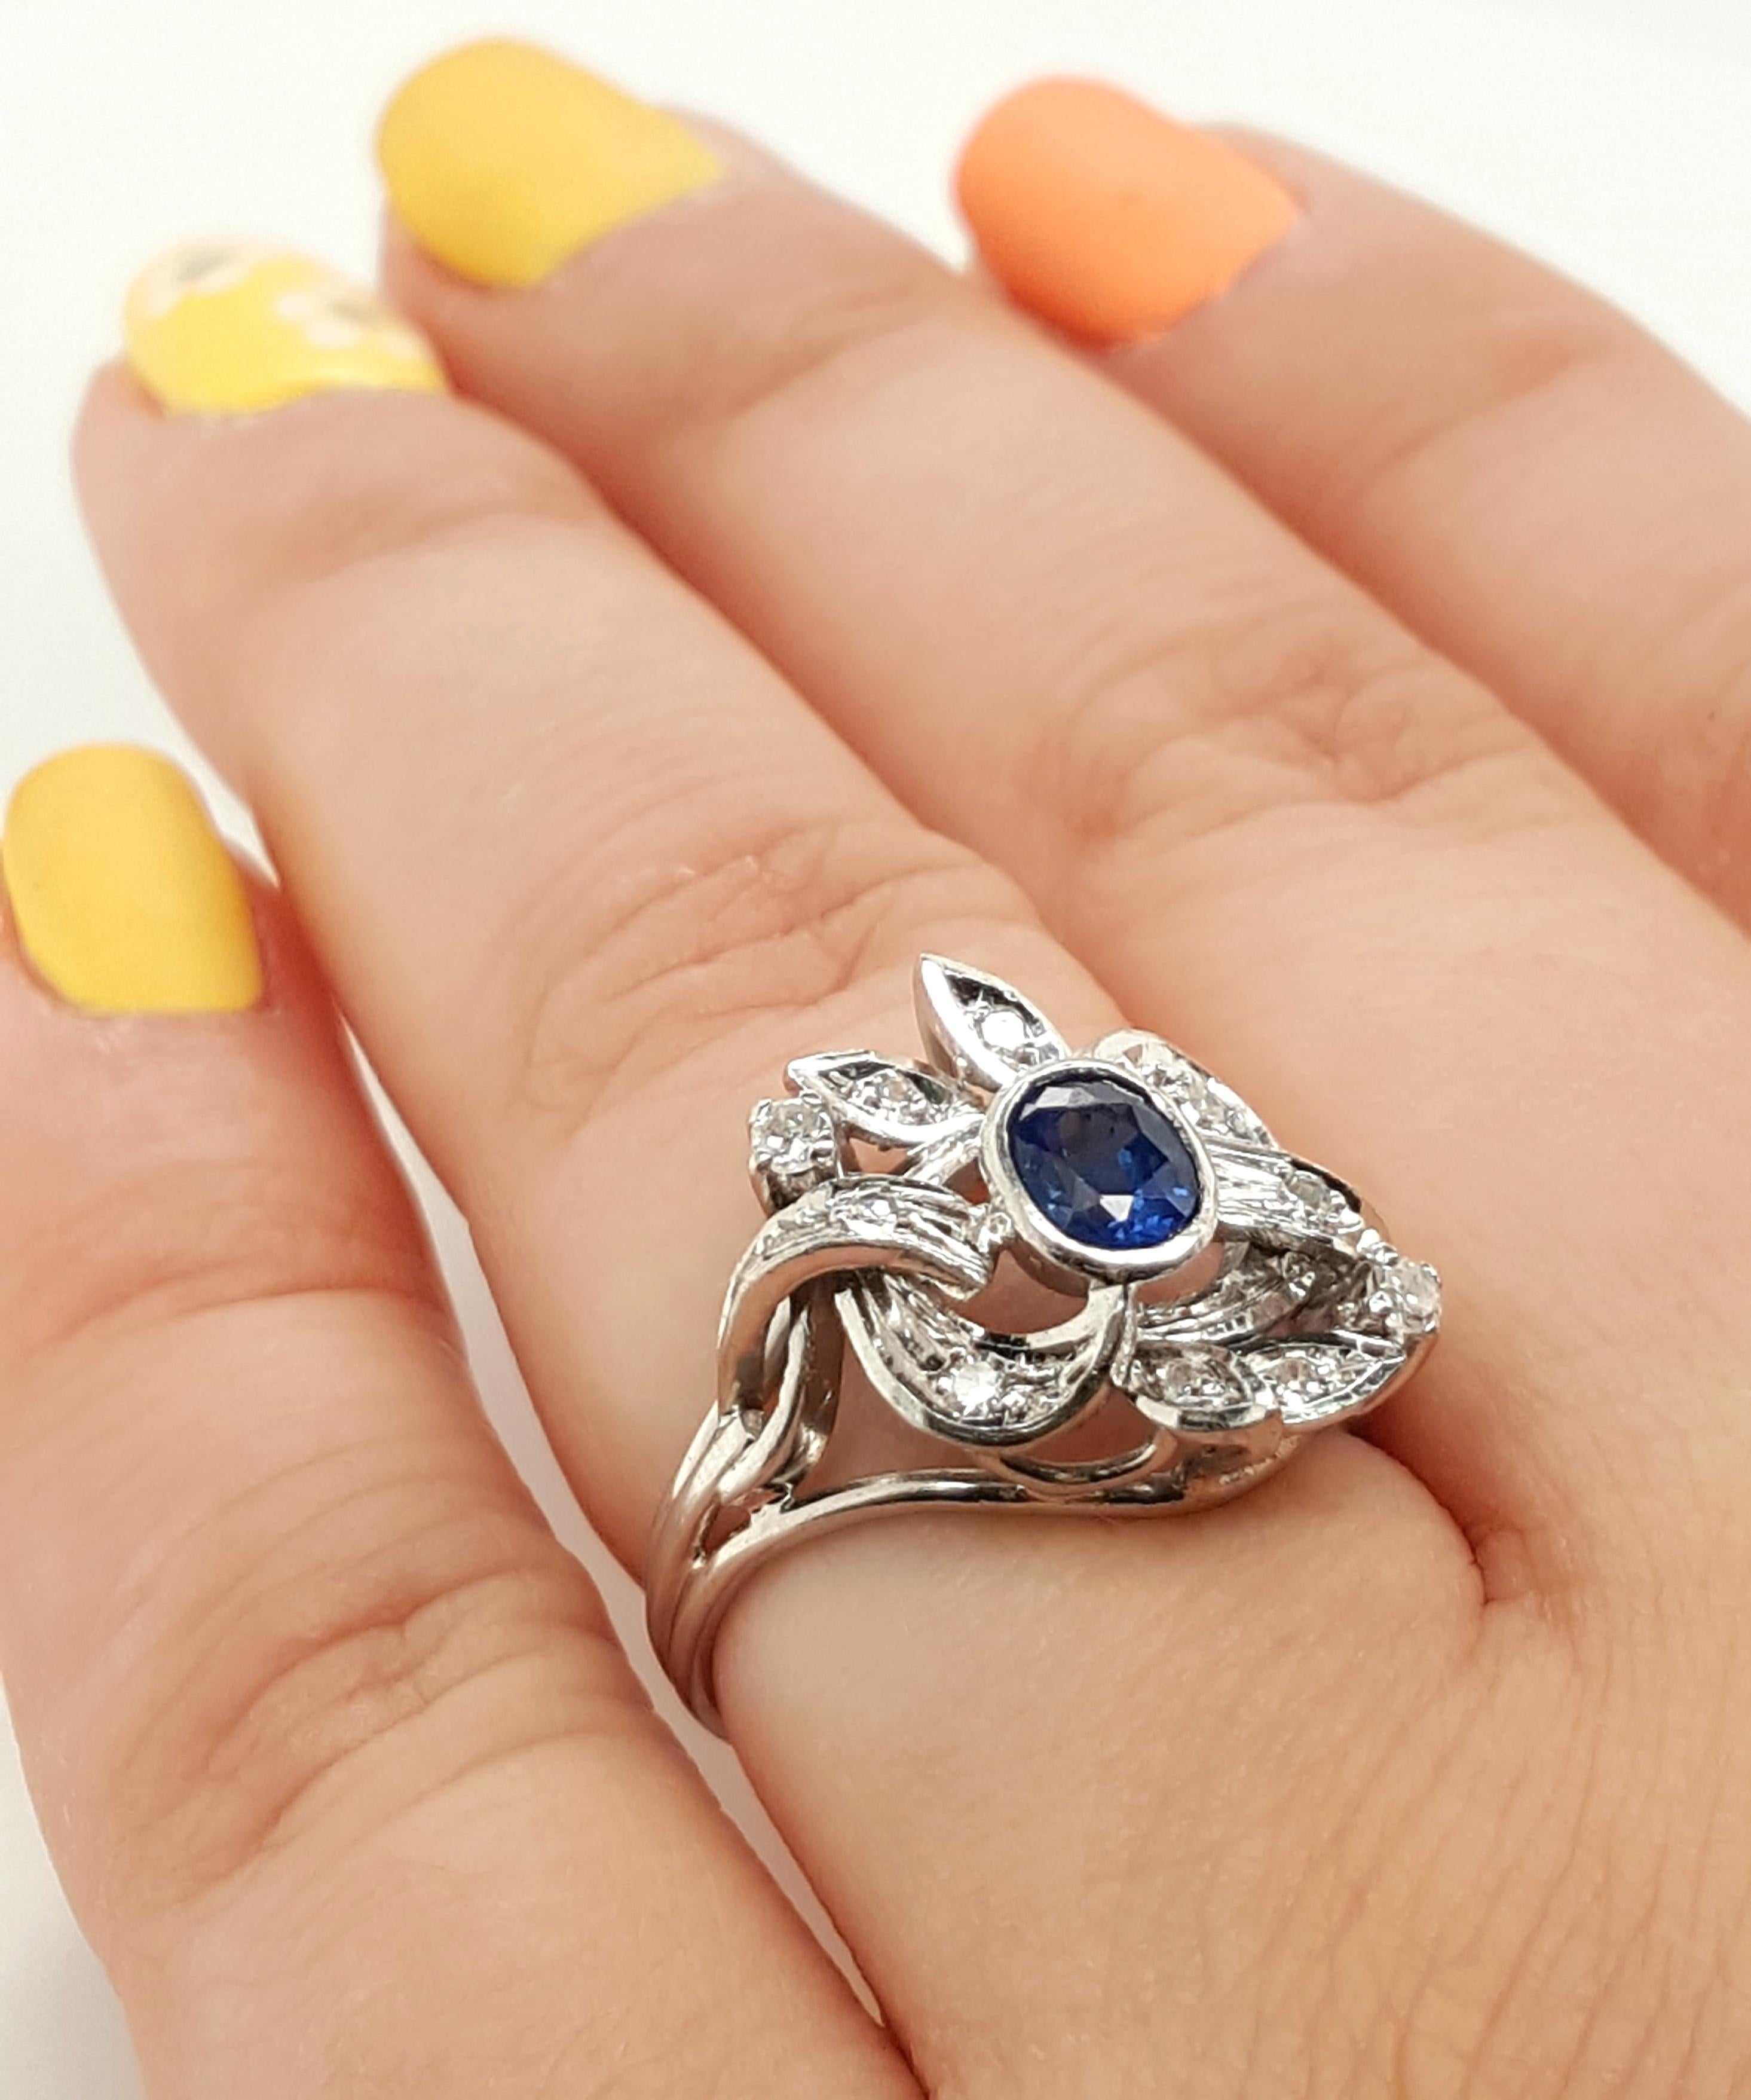 Estate 14 Karat White Gold Oval Blue Sapphire and Diamond Cocktail Ring.  The ring feature a lovely oval shaped blue sapphire.  The stone is set into a 14 karat white gold bezel enhanced by an ornate pattern of single cut diamonds and gold, with a